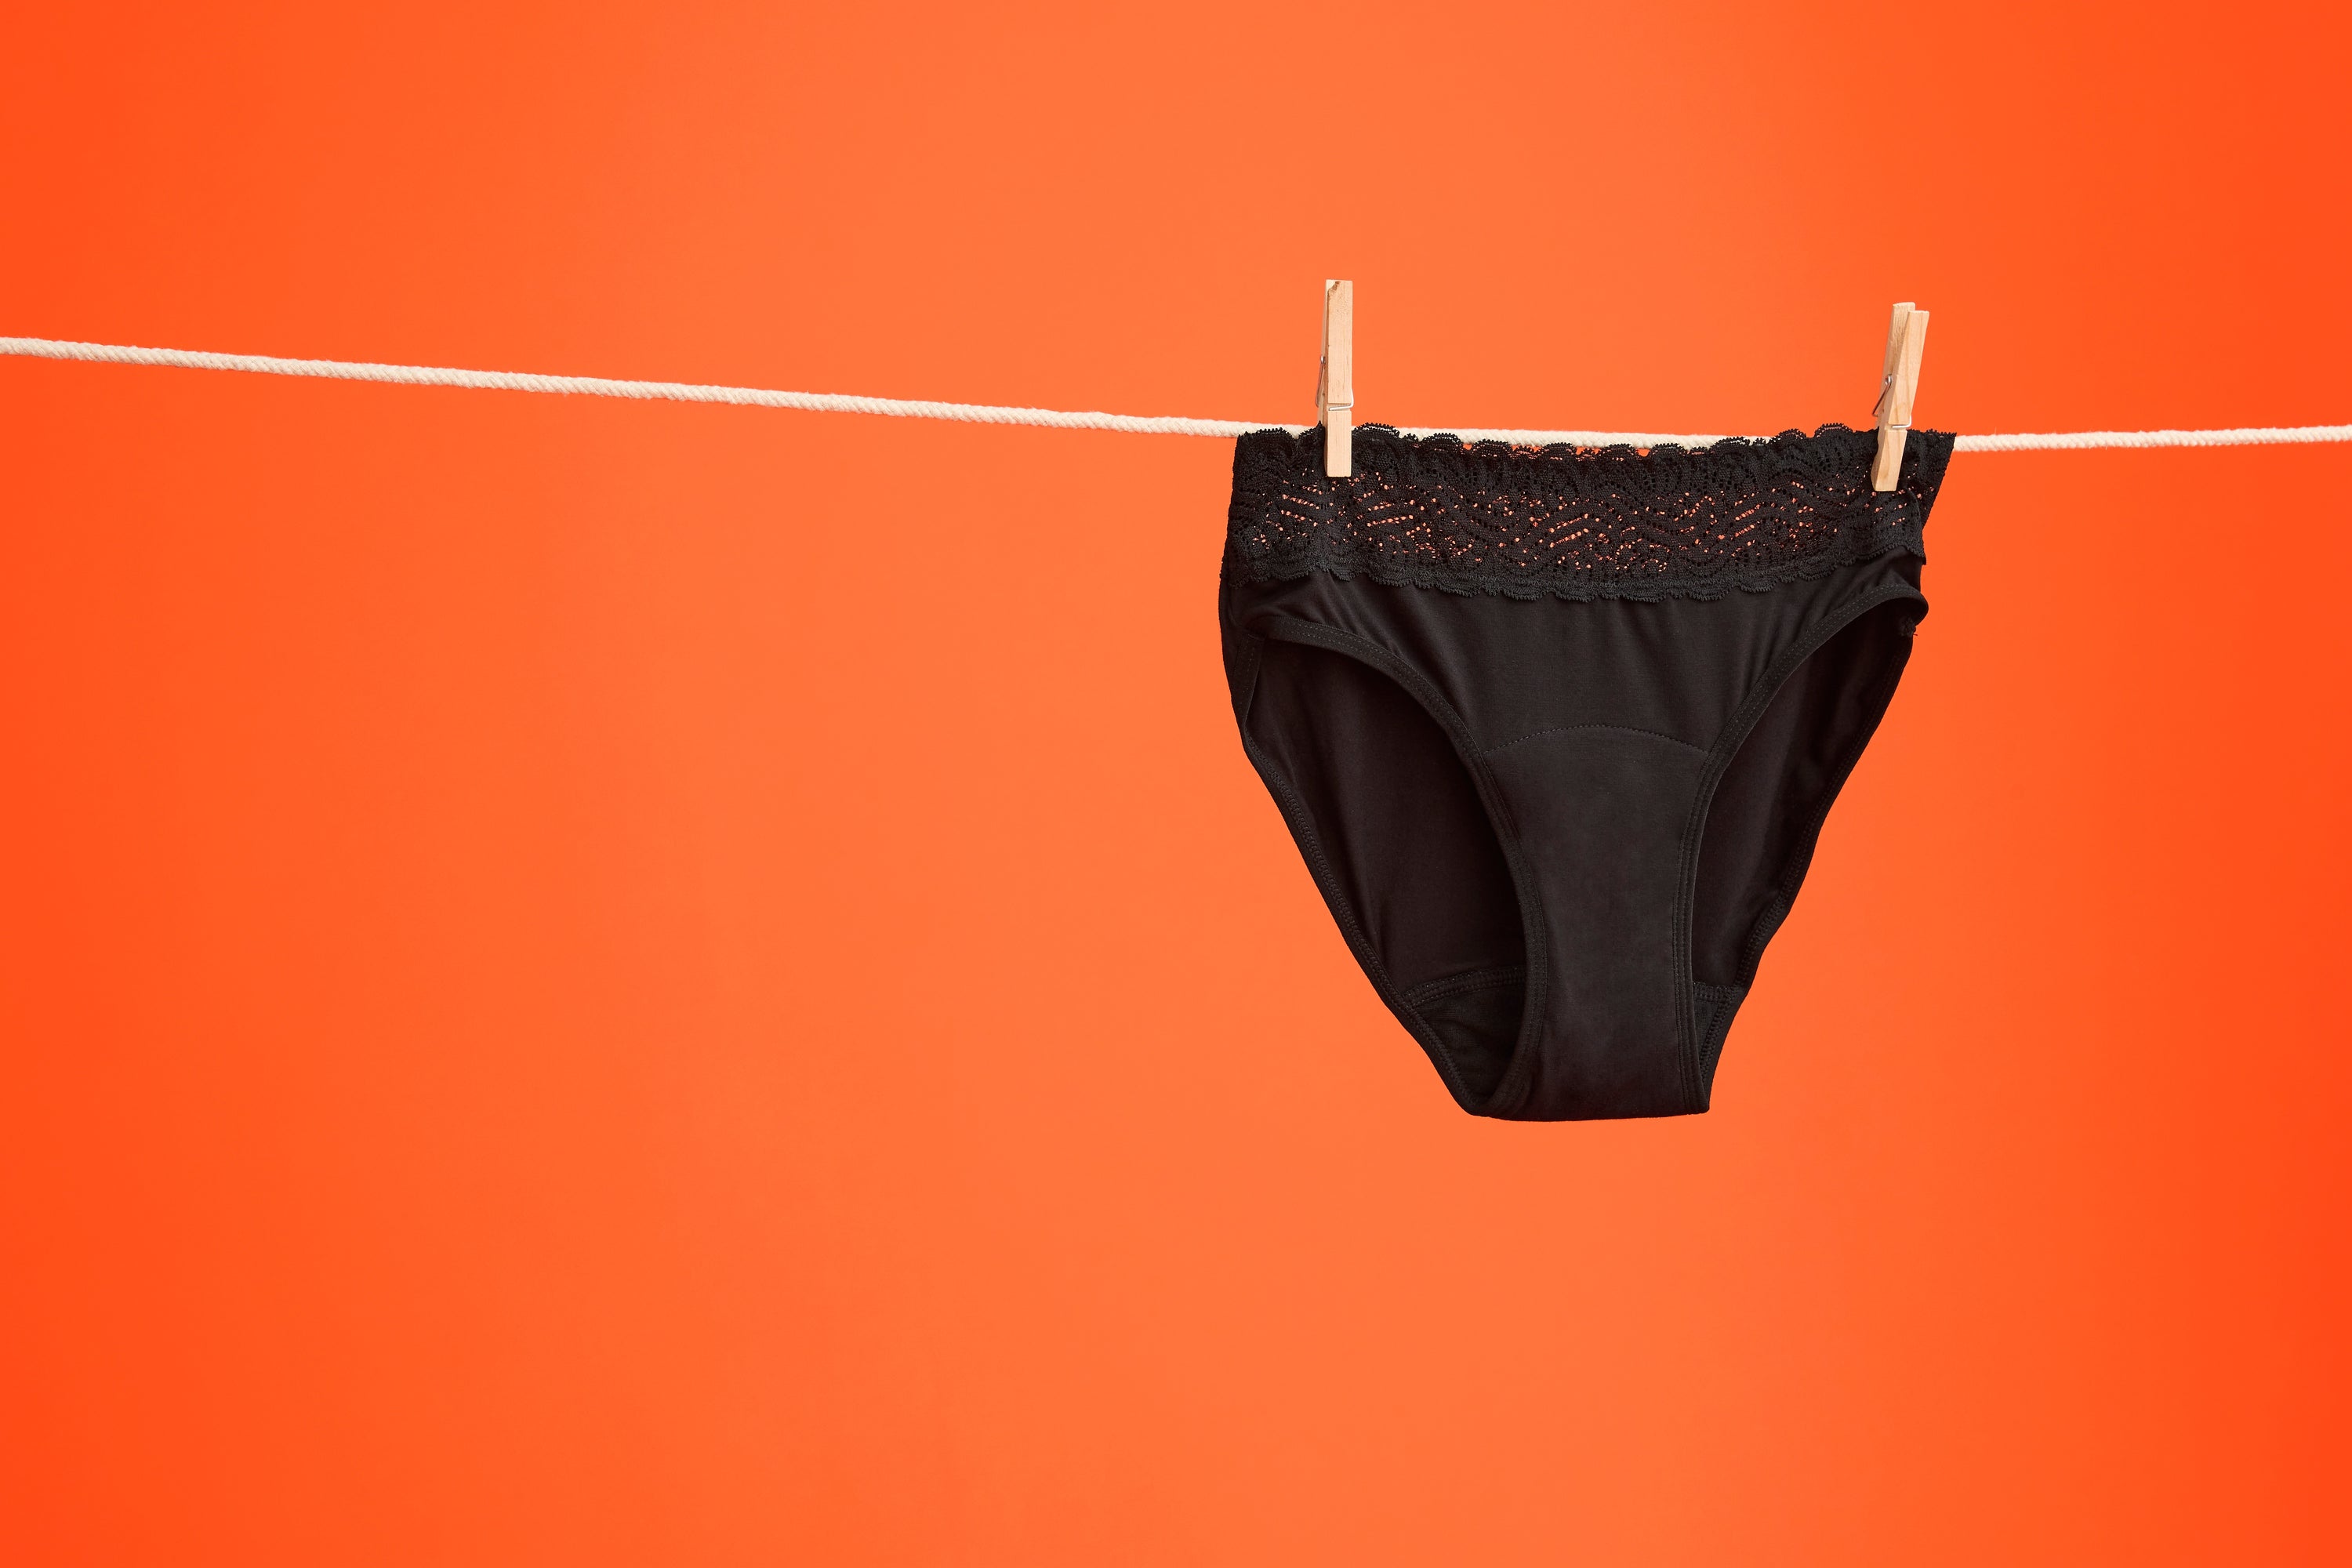 These period pants from Modibodi are helping women protect the